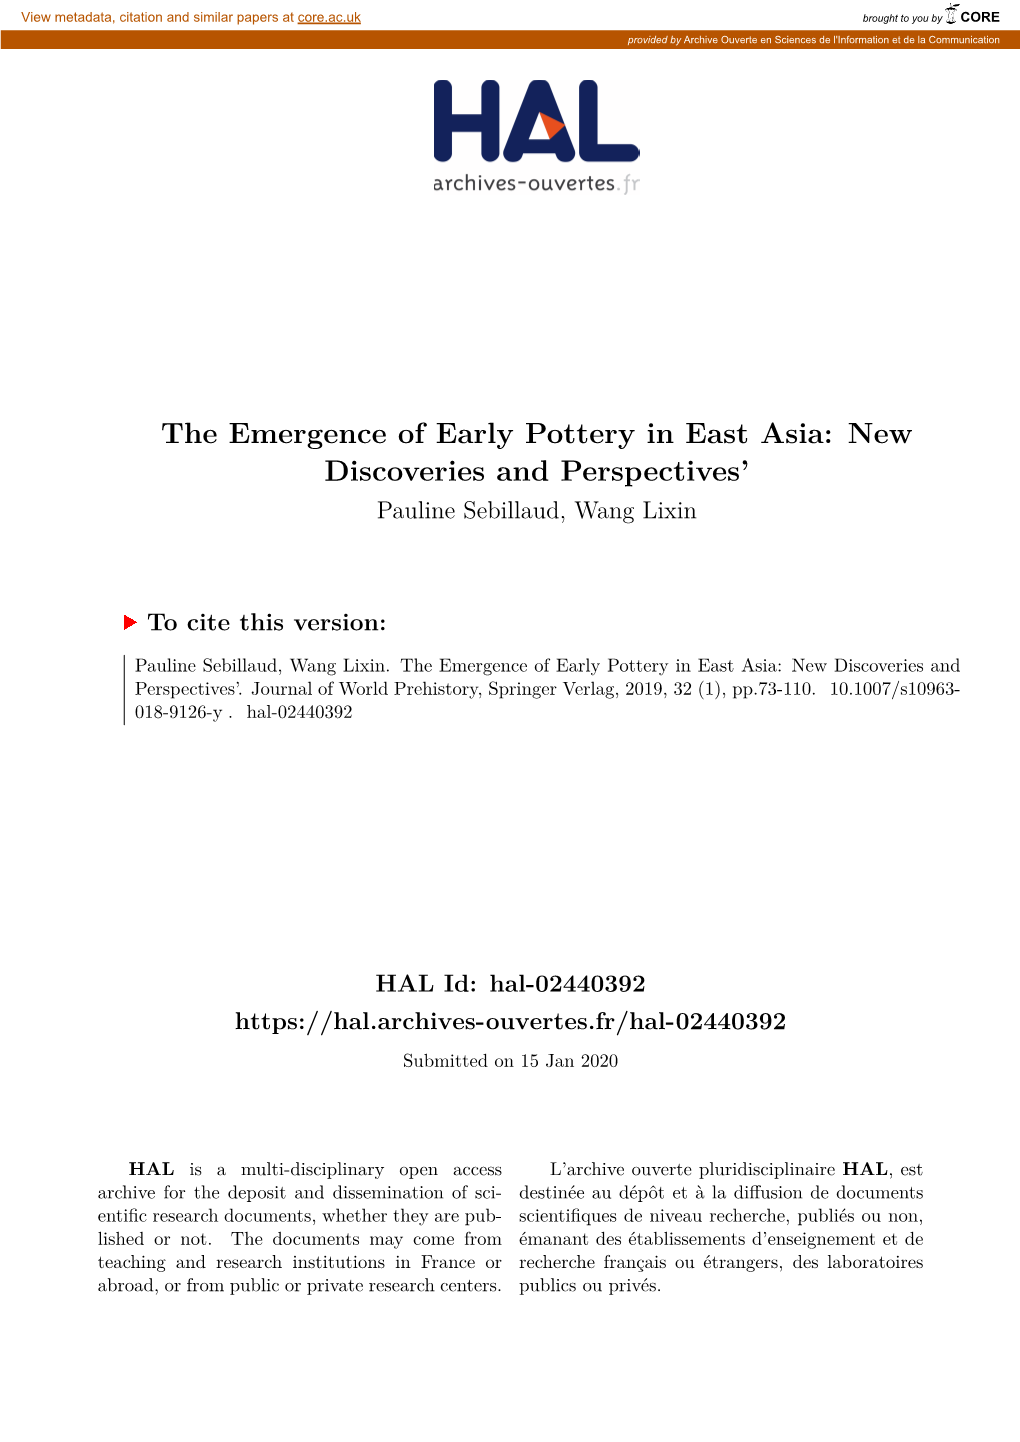 The Emergence of Early Pottery in East Asia: New Discoveries and Perspectives’ Pauline Sebillaud, Wang Lixin